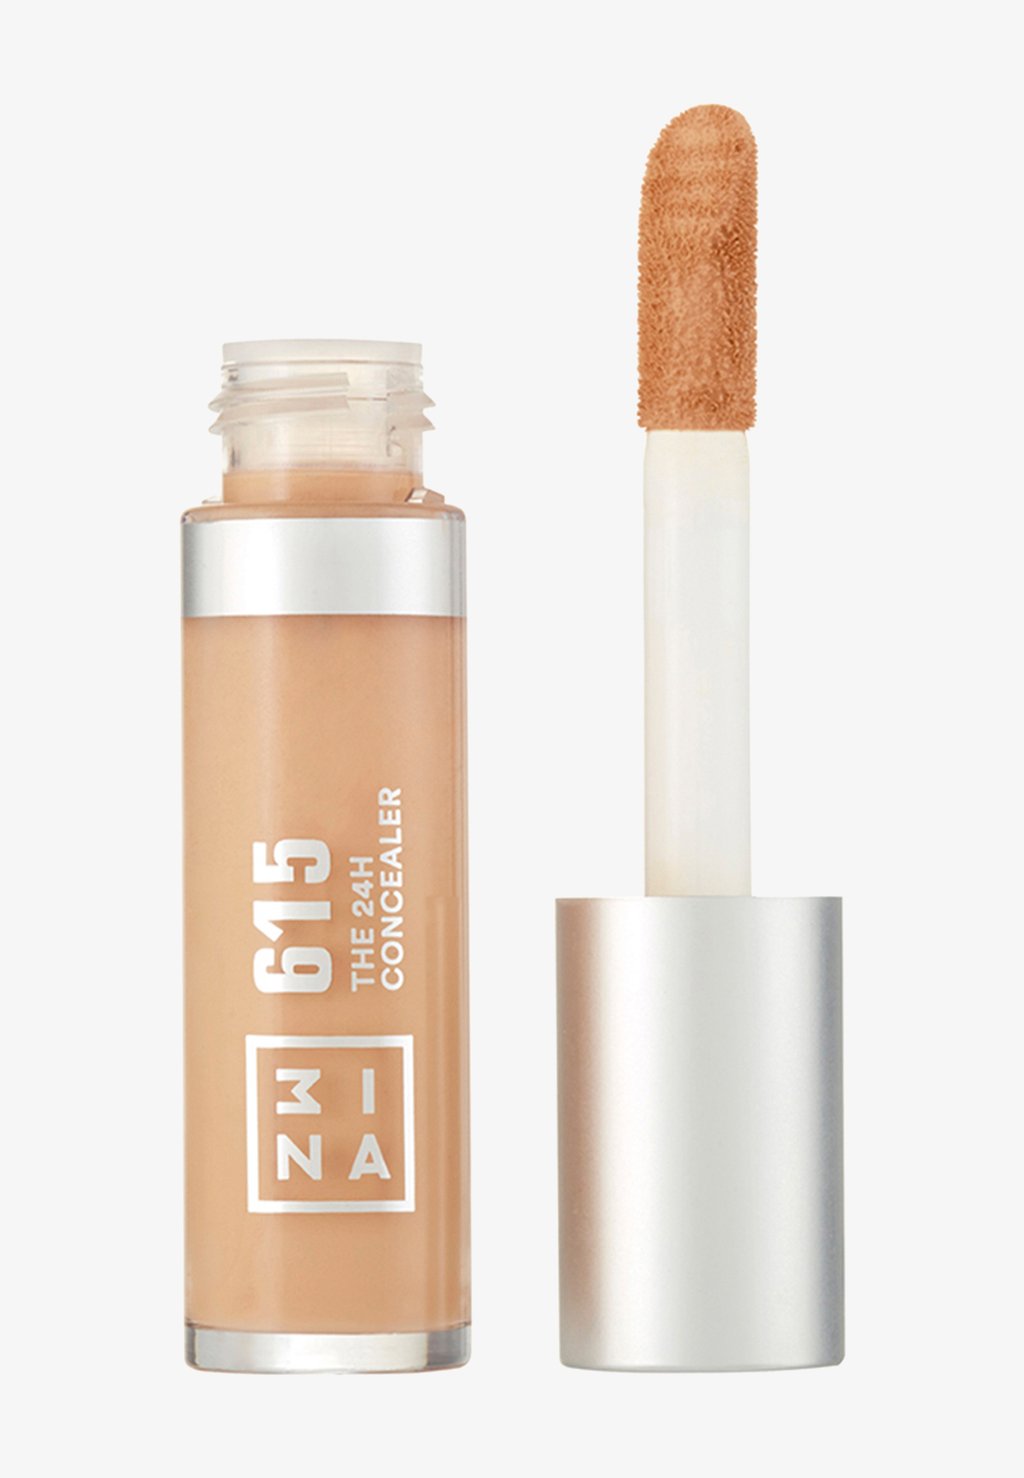 Консилер The 24H Concealer 3ina, цвет 615 light sand 3ina the 24h concealer оттенок 615 1